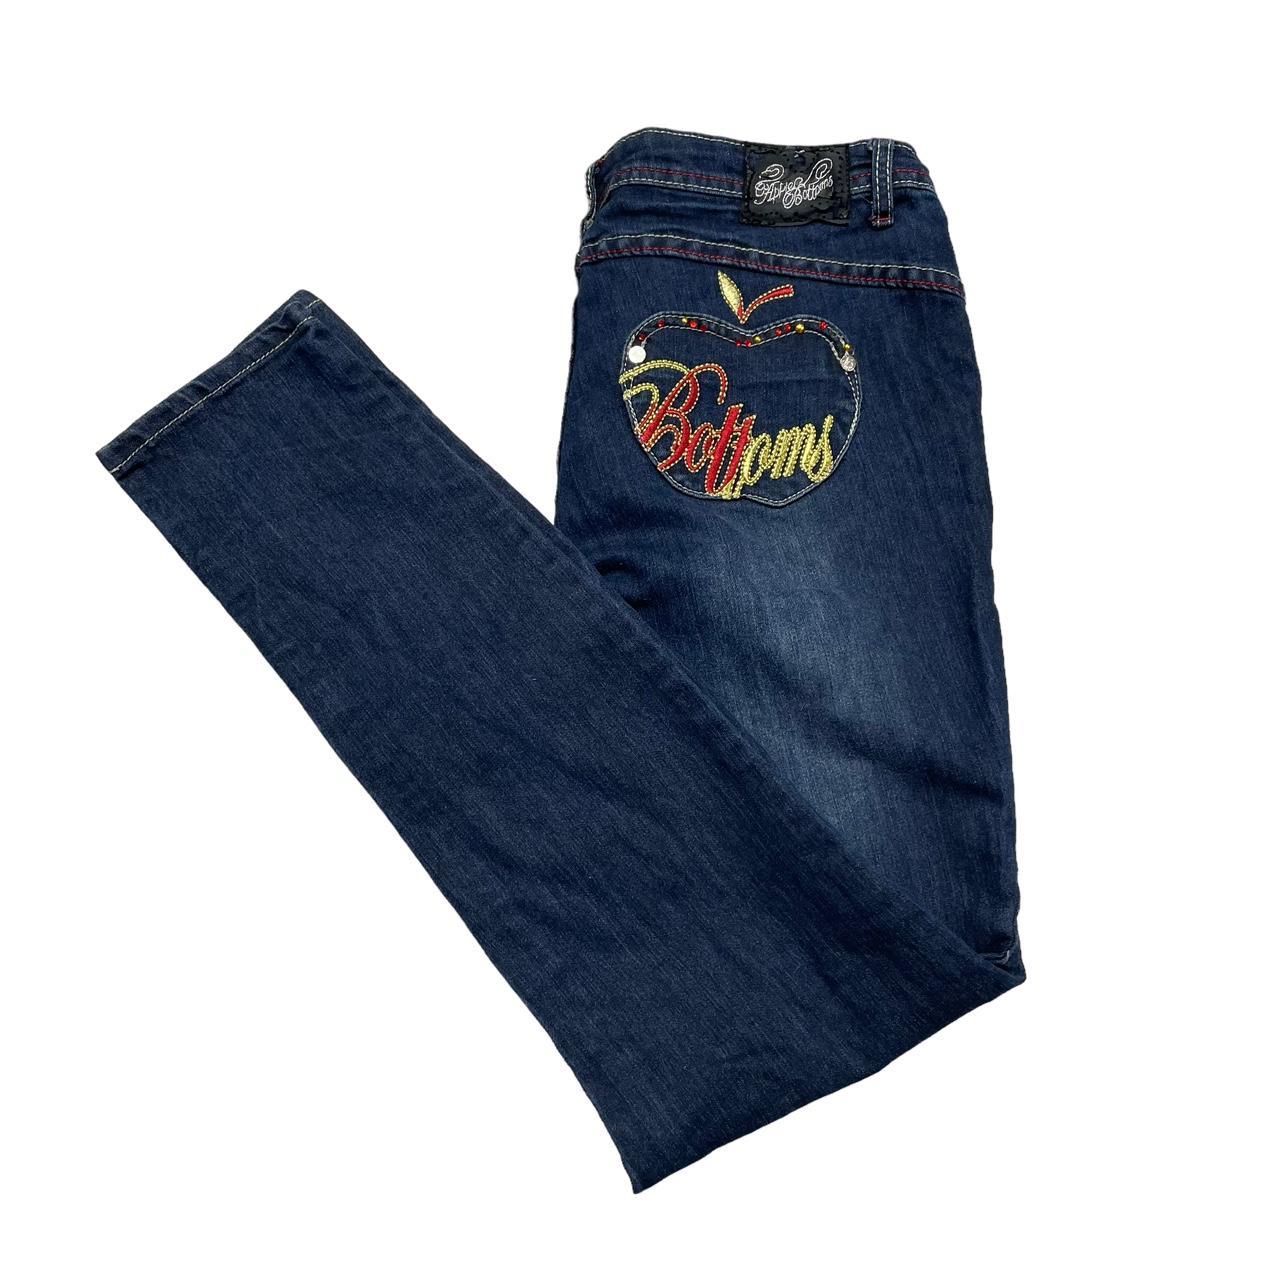 Apple Bottoms Women's Blue and Navy Jeans